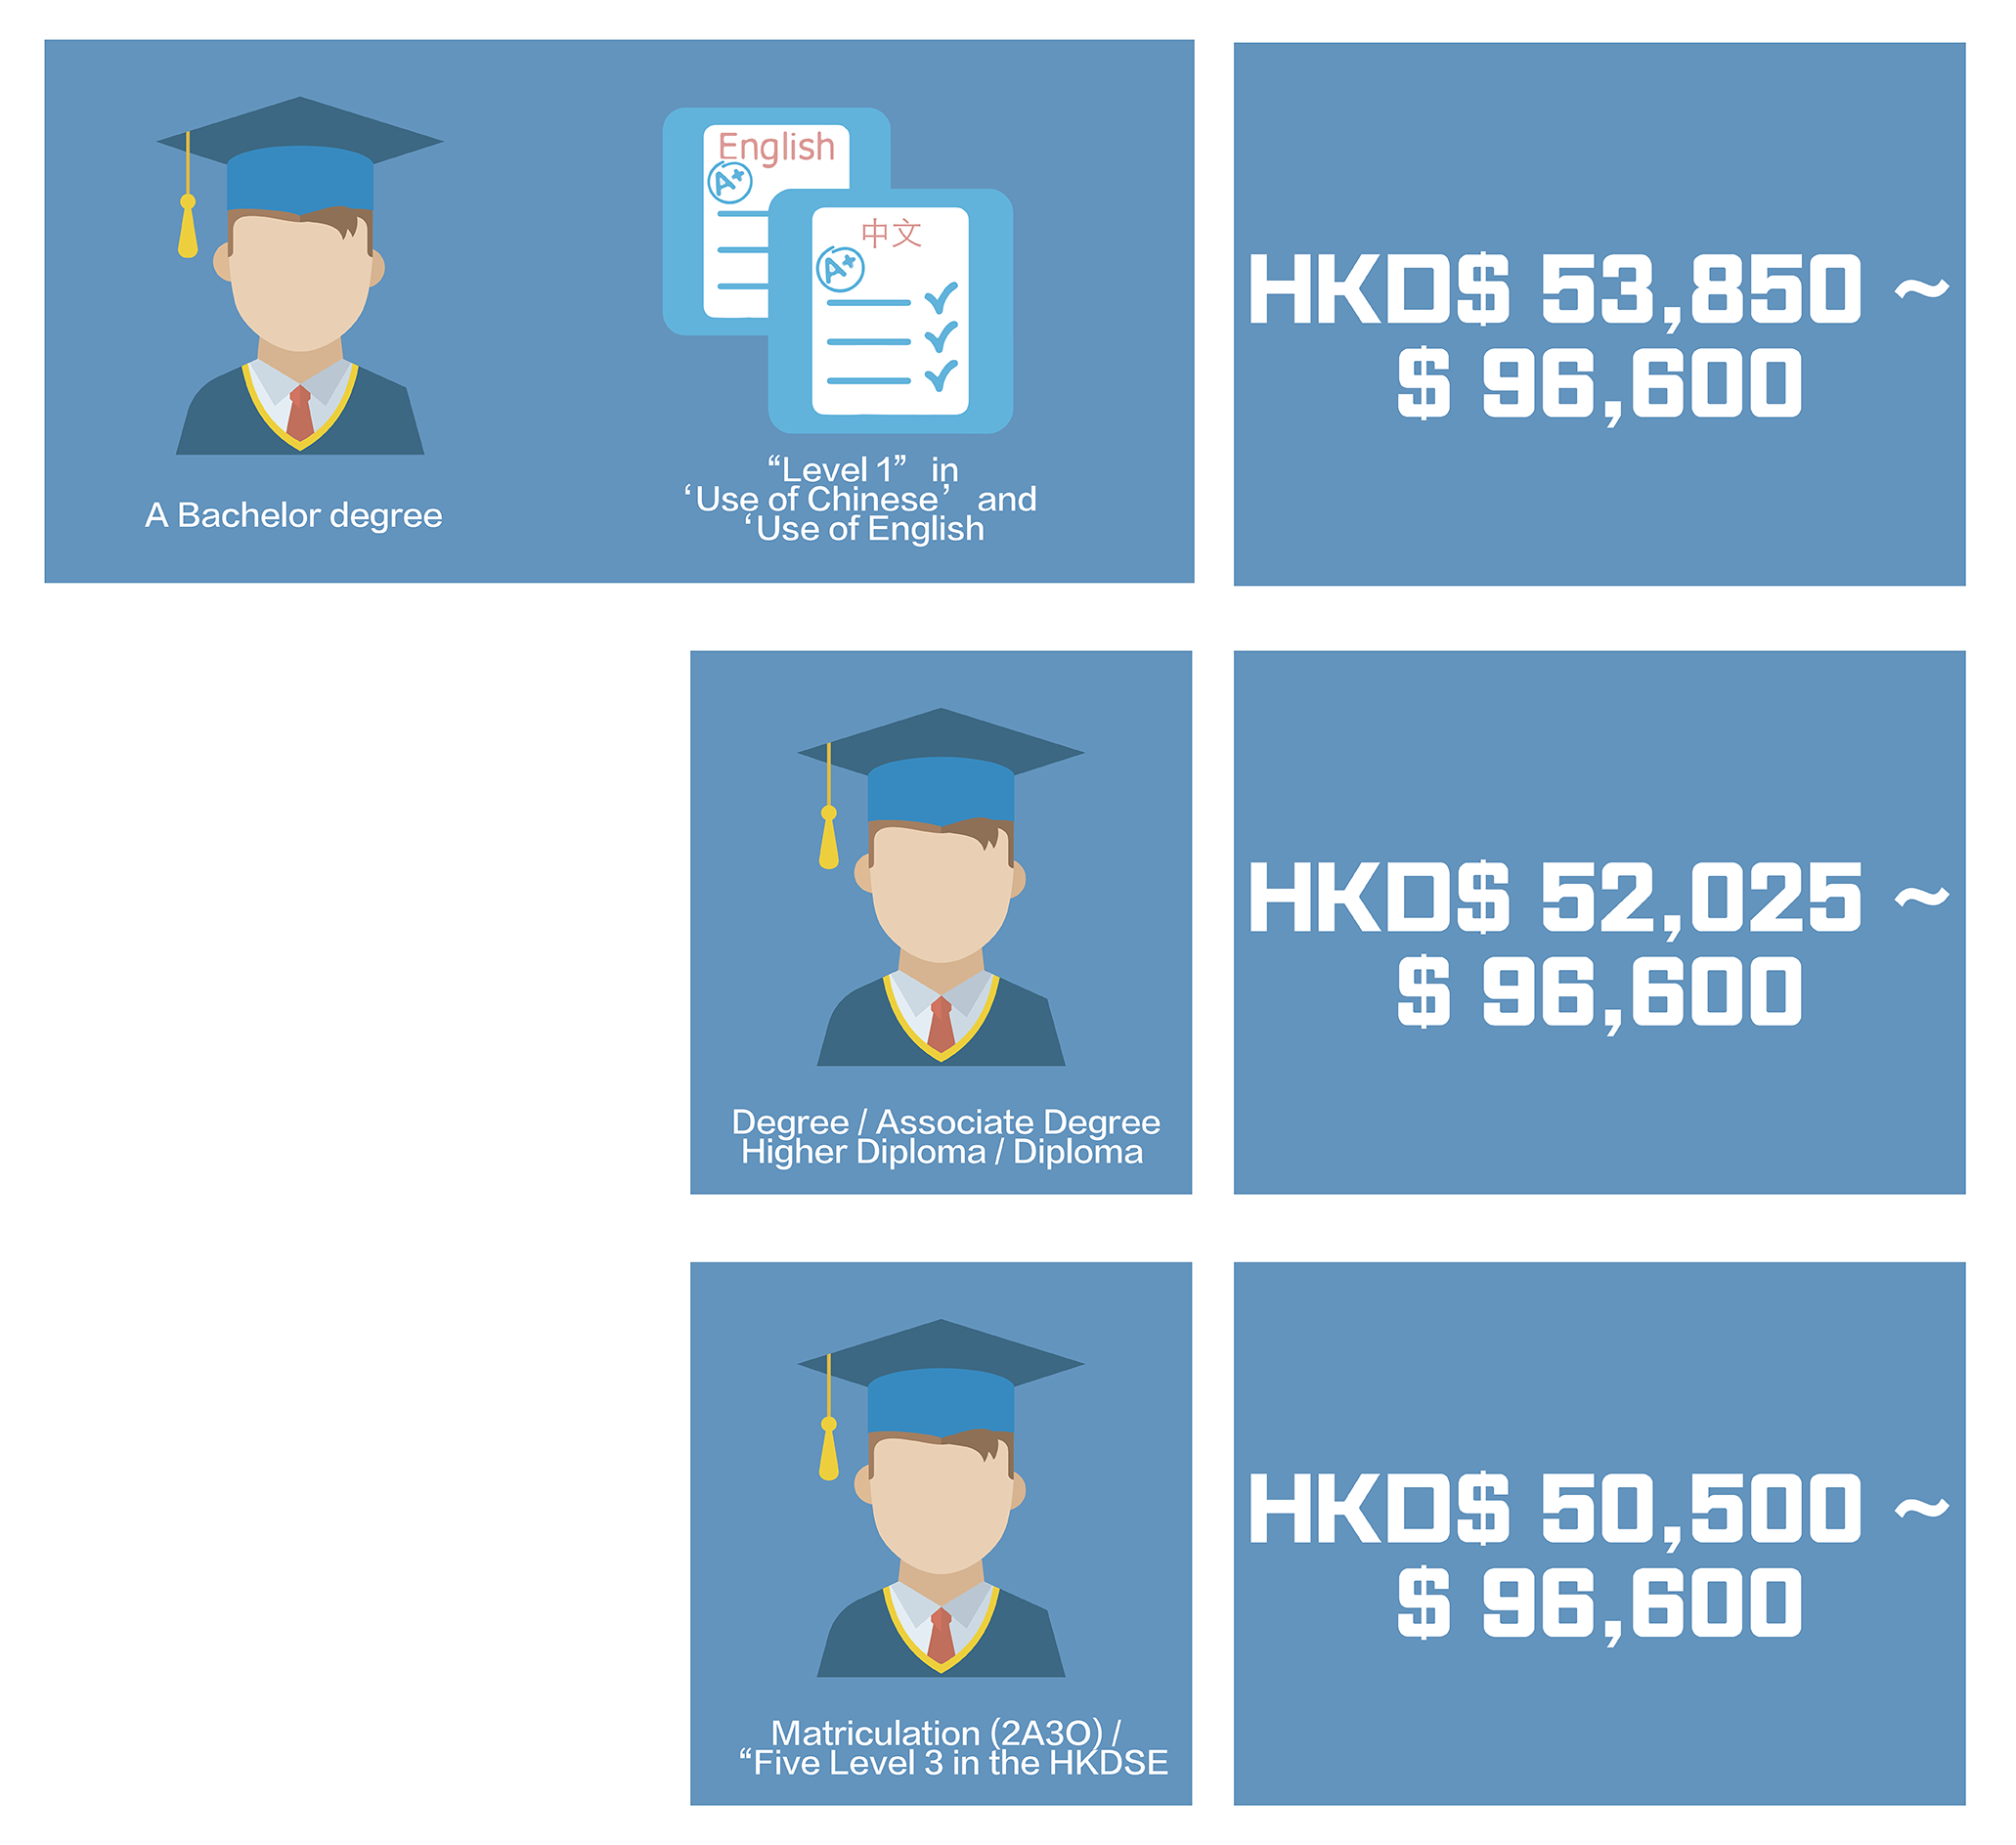 A Bachelor degree + ‘Level 1’ in ‘Use of Chinese’ and ‘Use of English’, HKD $50,200 - $91,615; Degree / Associate Degree / Higher Diploma / Diploma, $48,500 - $91,615; Matriculation (2A3O) / ‘Five Level 3 in the HKDSE’, $47,080 - $91,615.